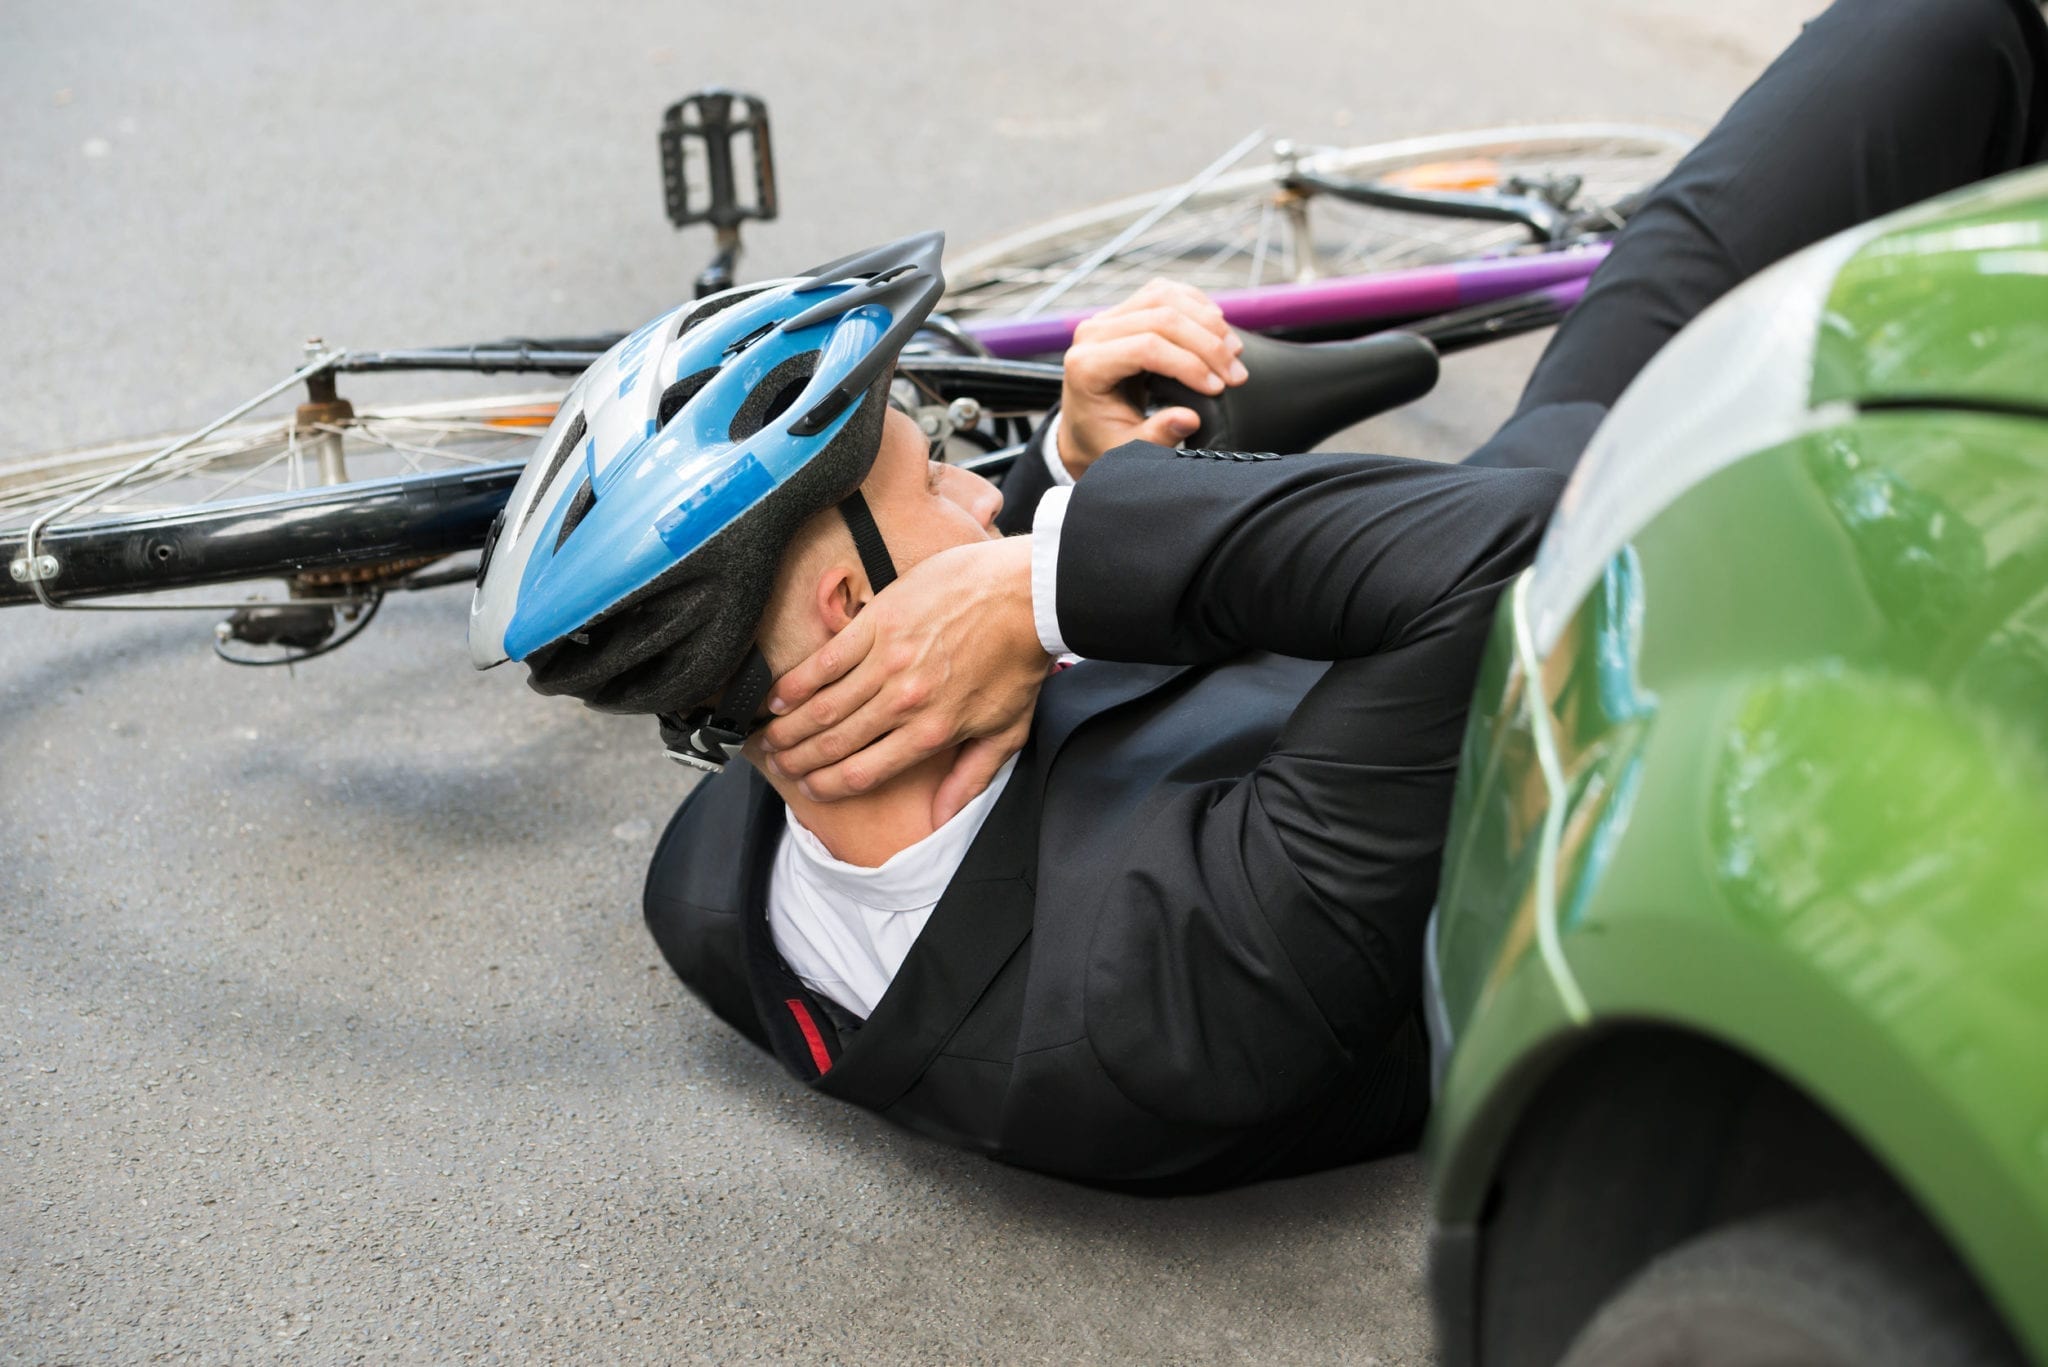 Steps to Take after Getting into a Bicycle Accident in Florida